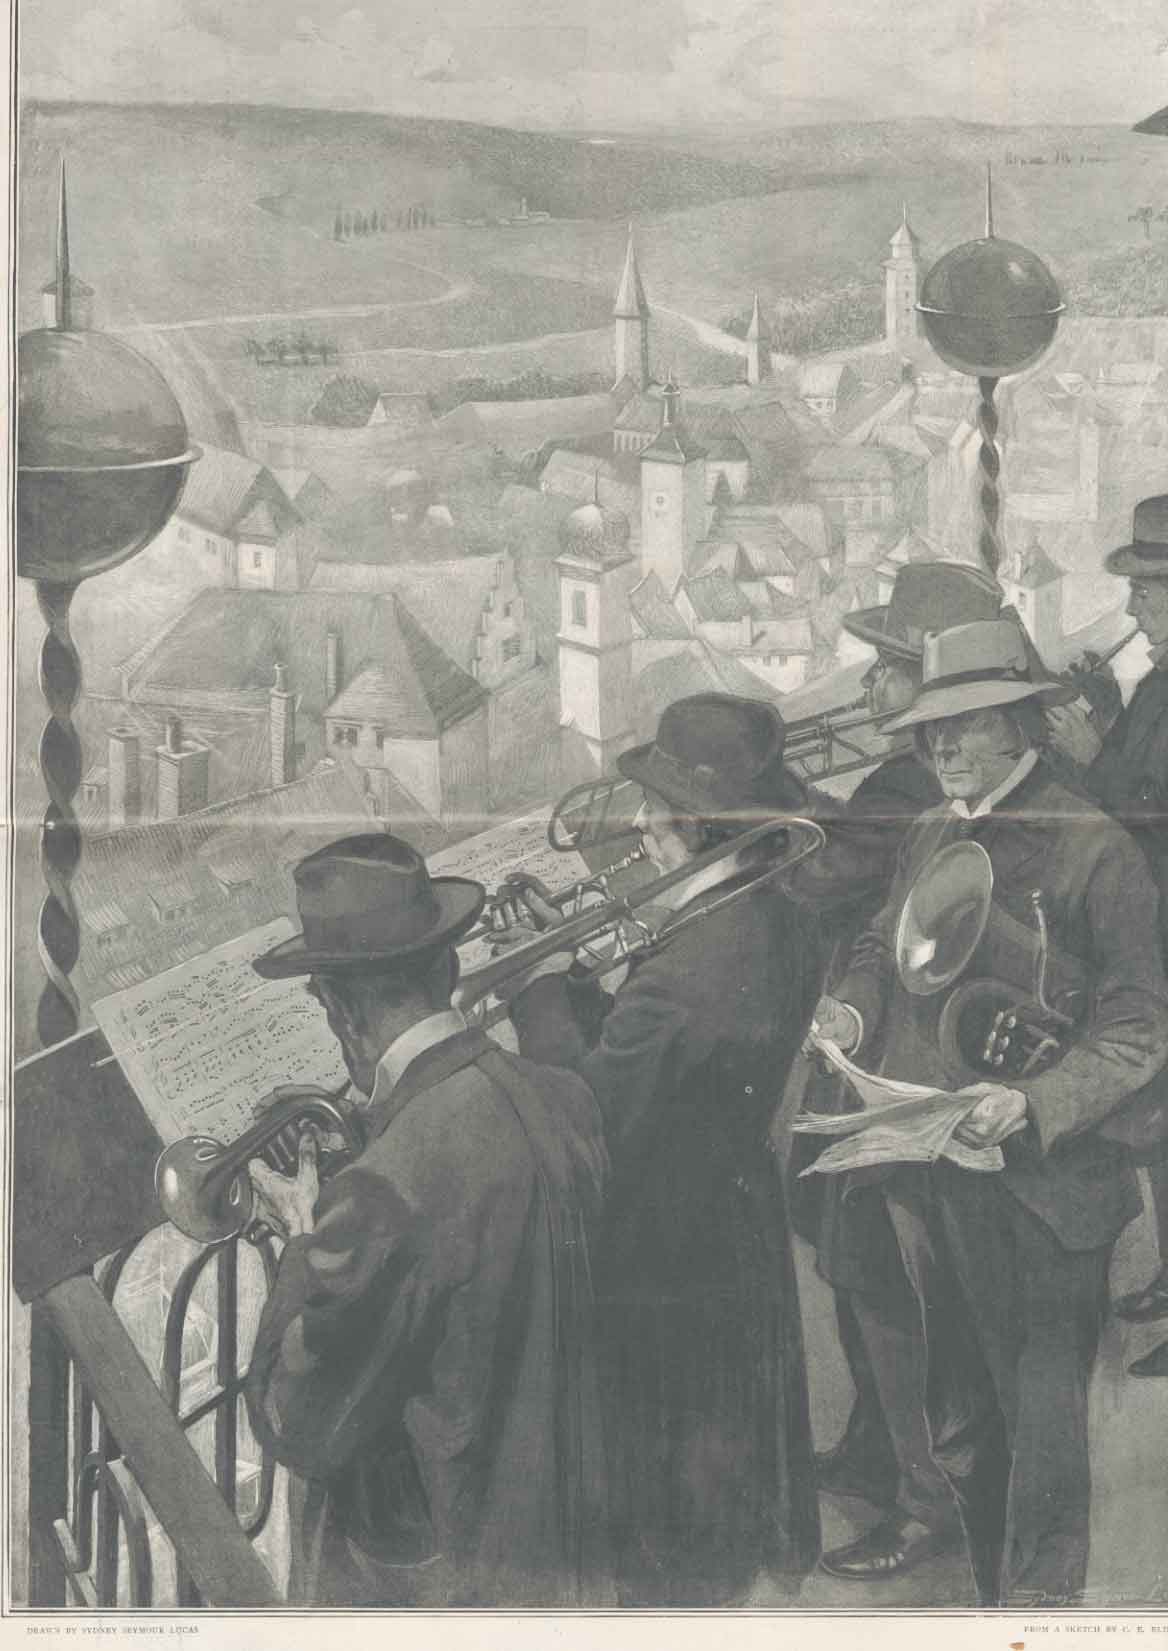 The History of the Trombone